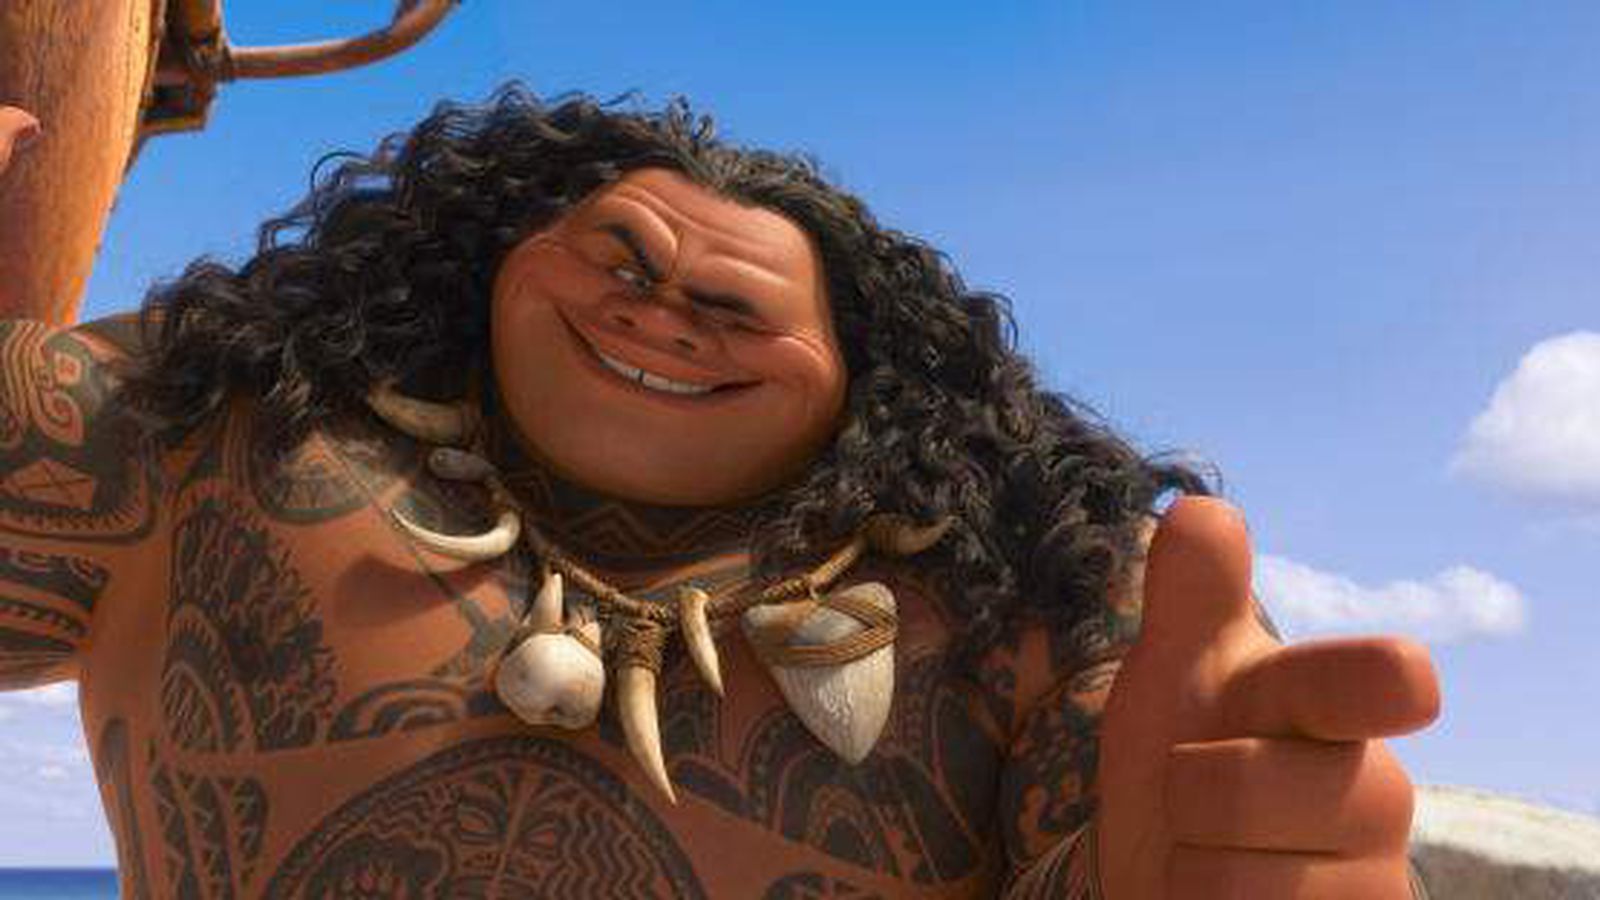 Review: Dwayne Johnson lifts otherwise placid 'Moana' on his character's beefy shoulders